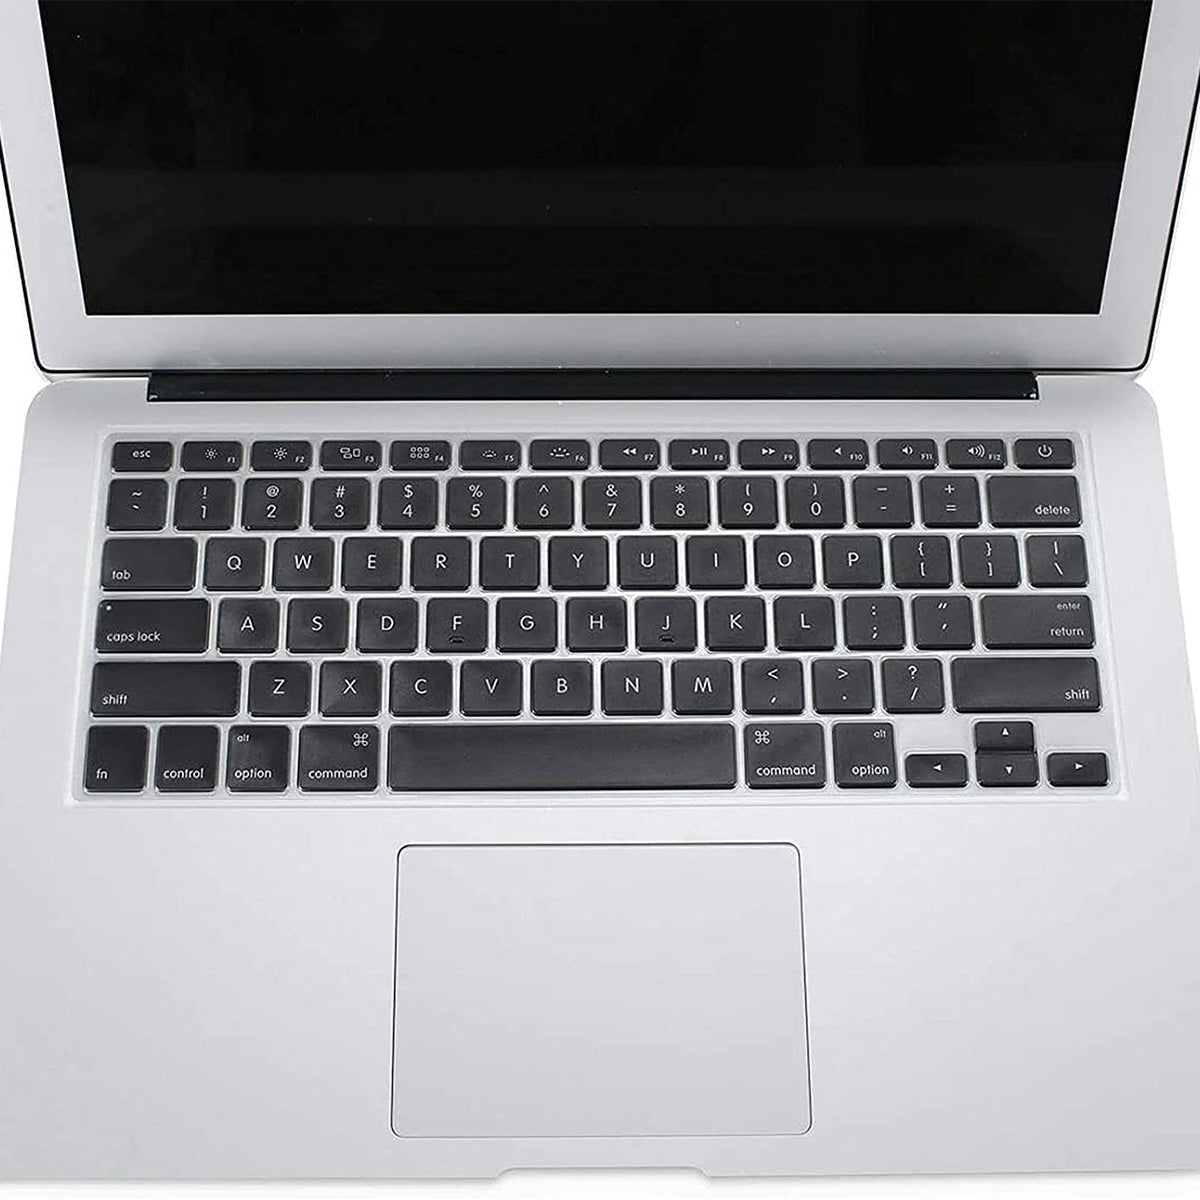 Lightweight Flexible Keyboard Cover Soft TPU Keyboard Protector for MacBook Air 11inch (A1370/A1465)